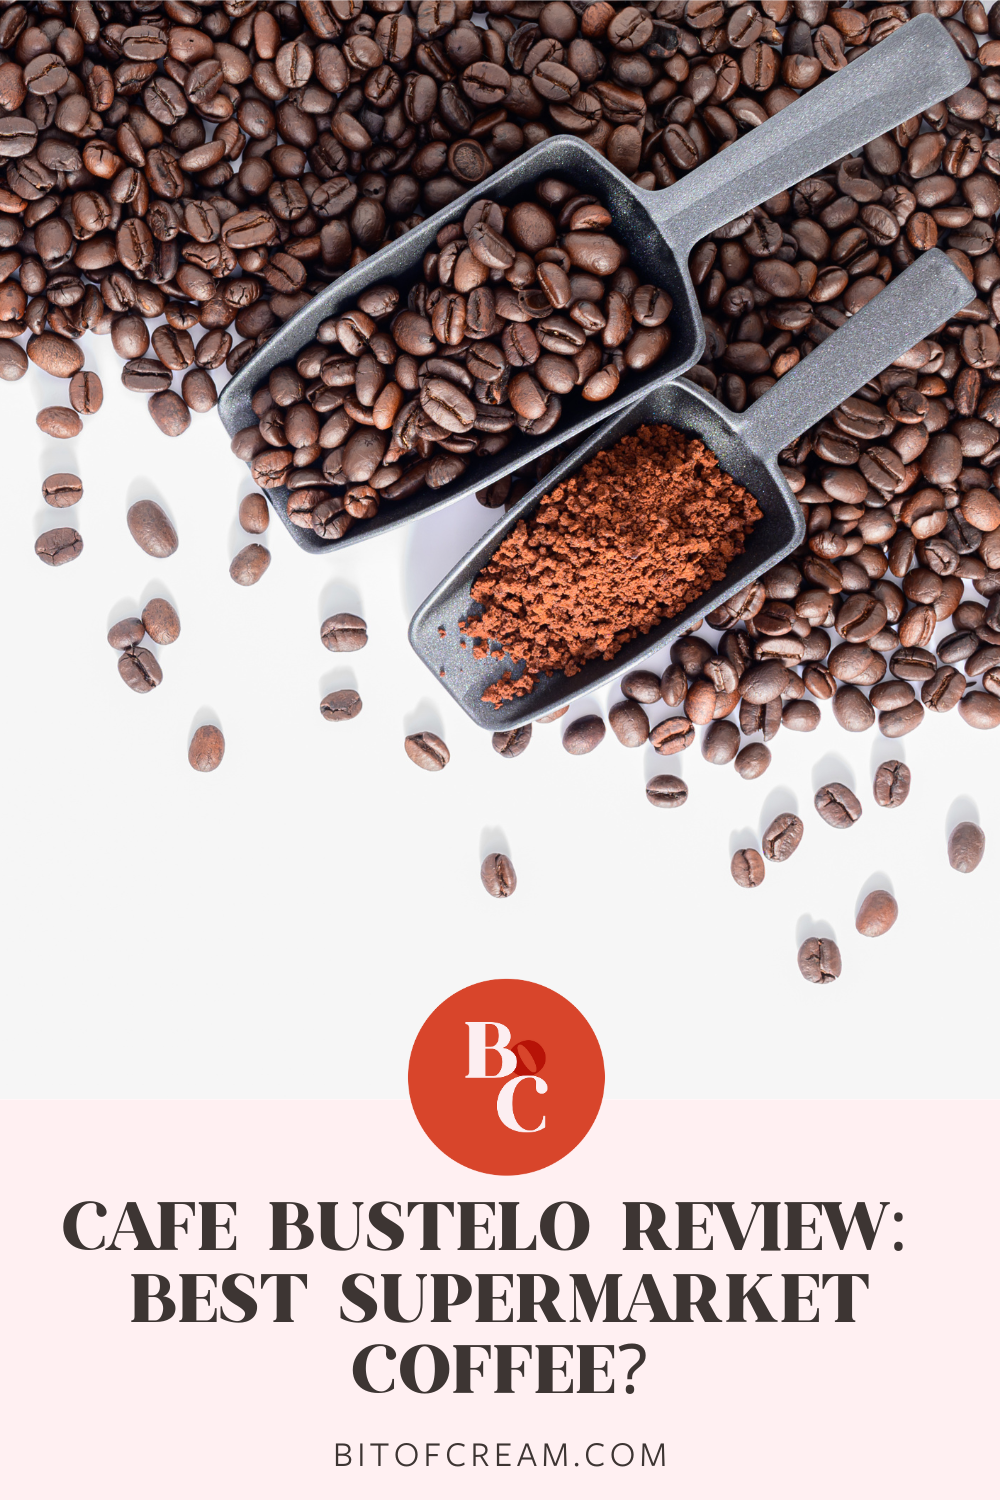 Cafe Bustelo Review